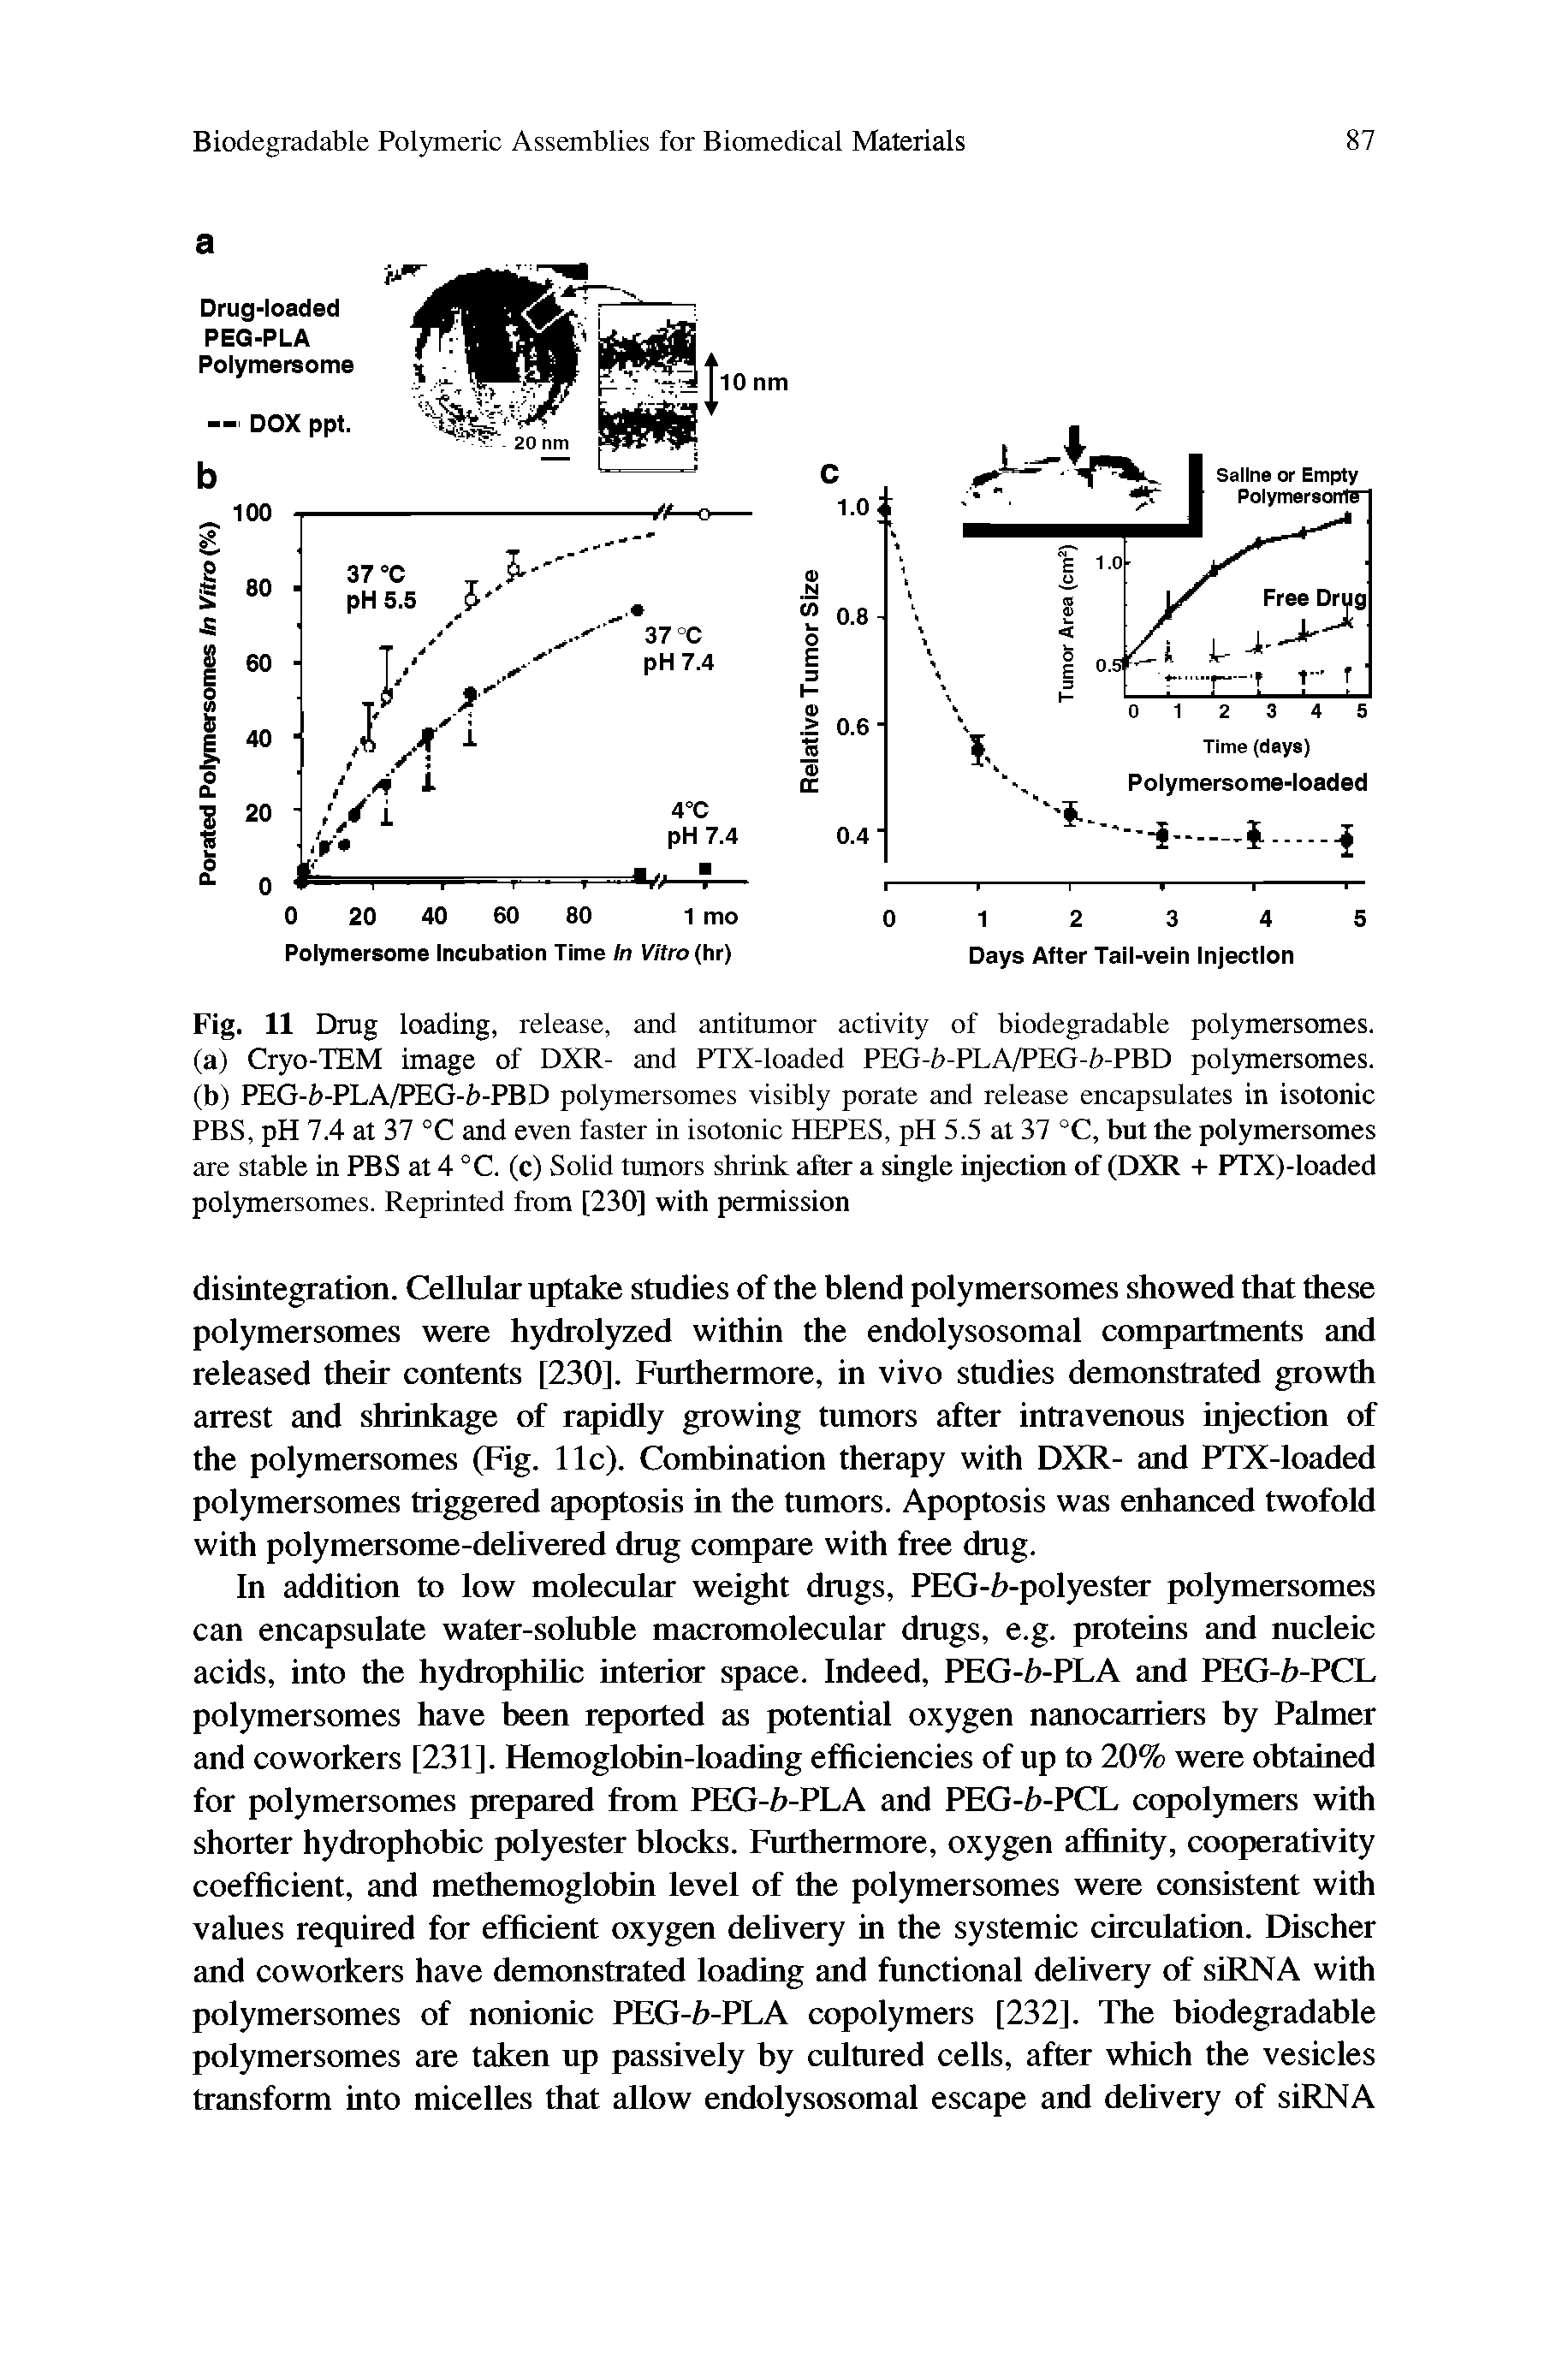 Fig. 11 Drug loading, release, and antitumor activity of biodegradable polymersomes.